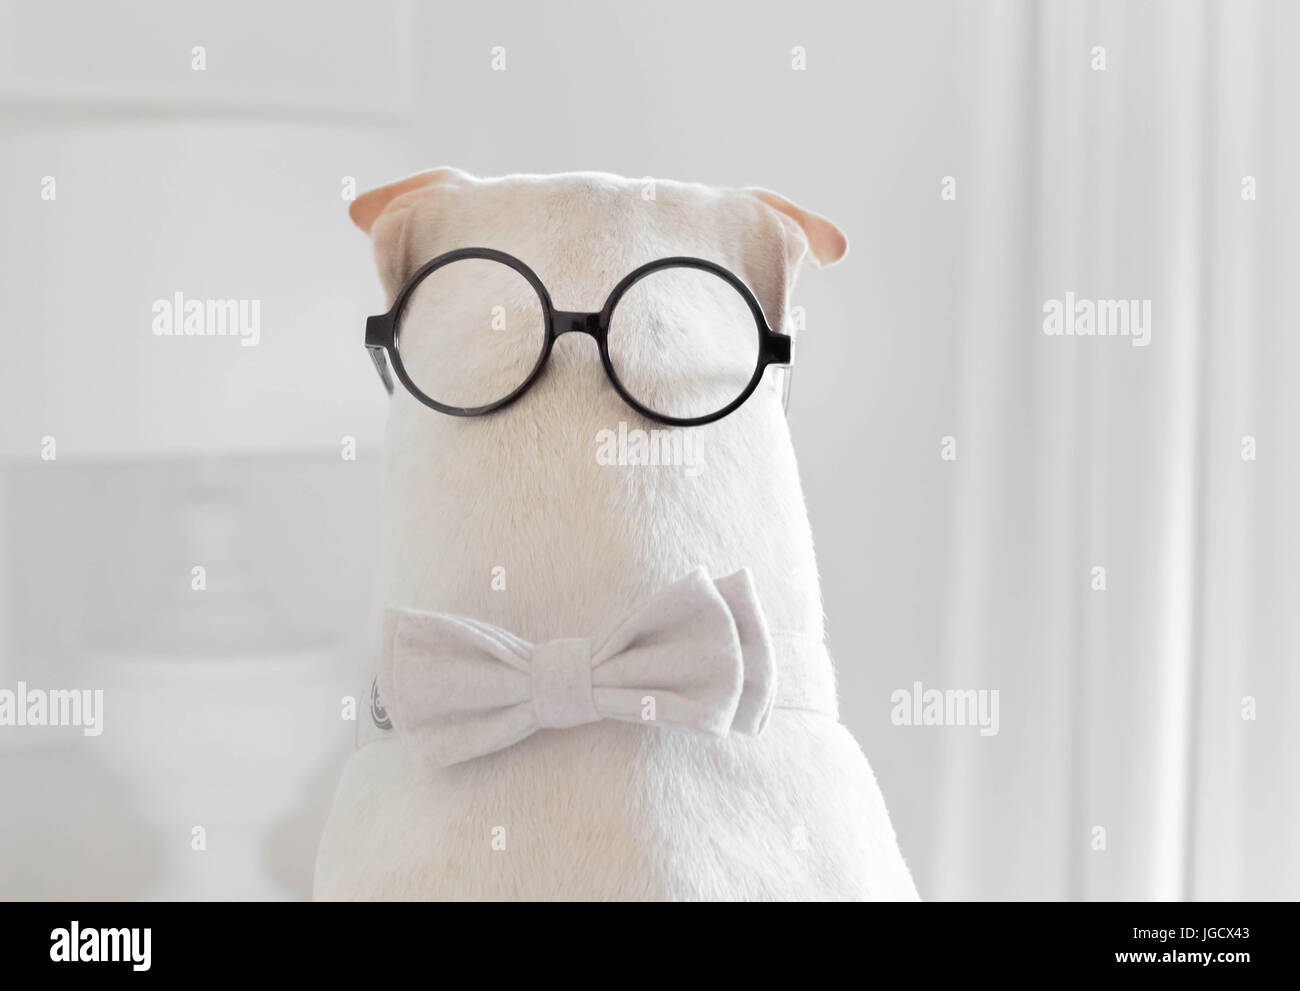 shar-pei dog wearing a bow tie and spectacles on the back of his head Stock Photo